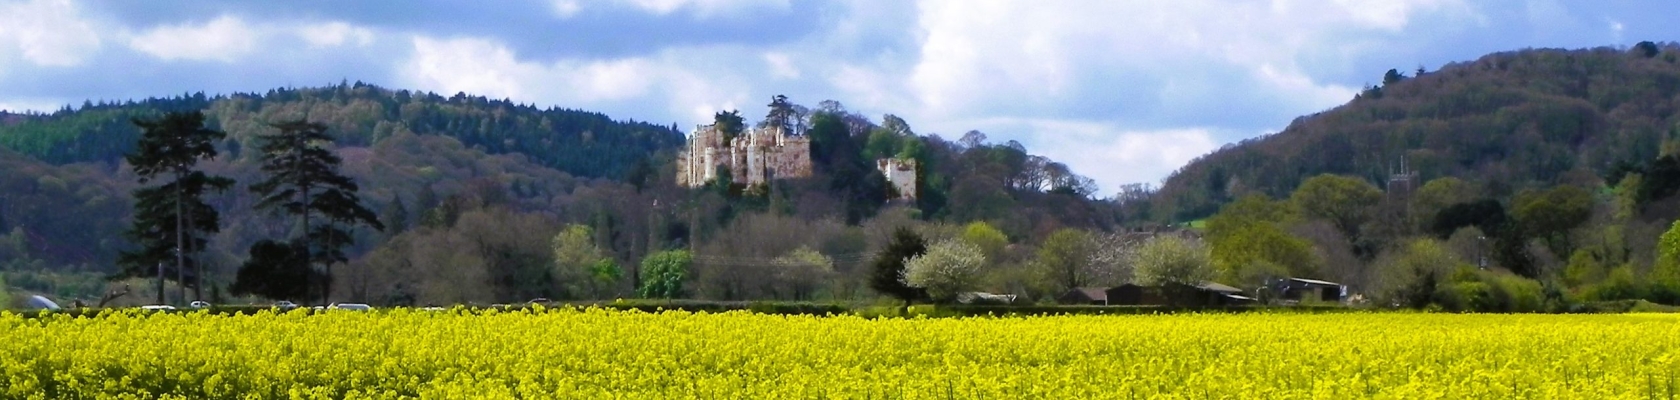 6. Dunster Castle from Flood Relief Channel (2)